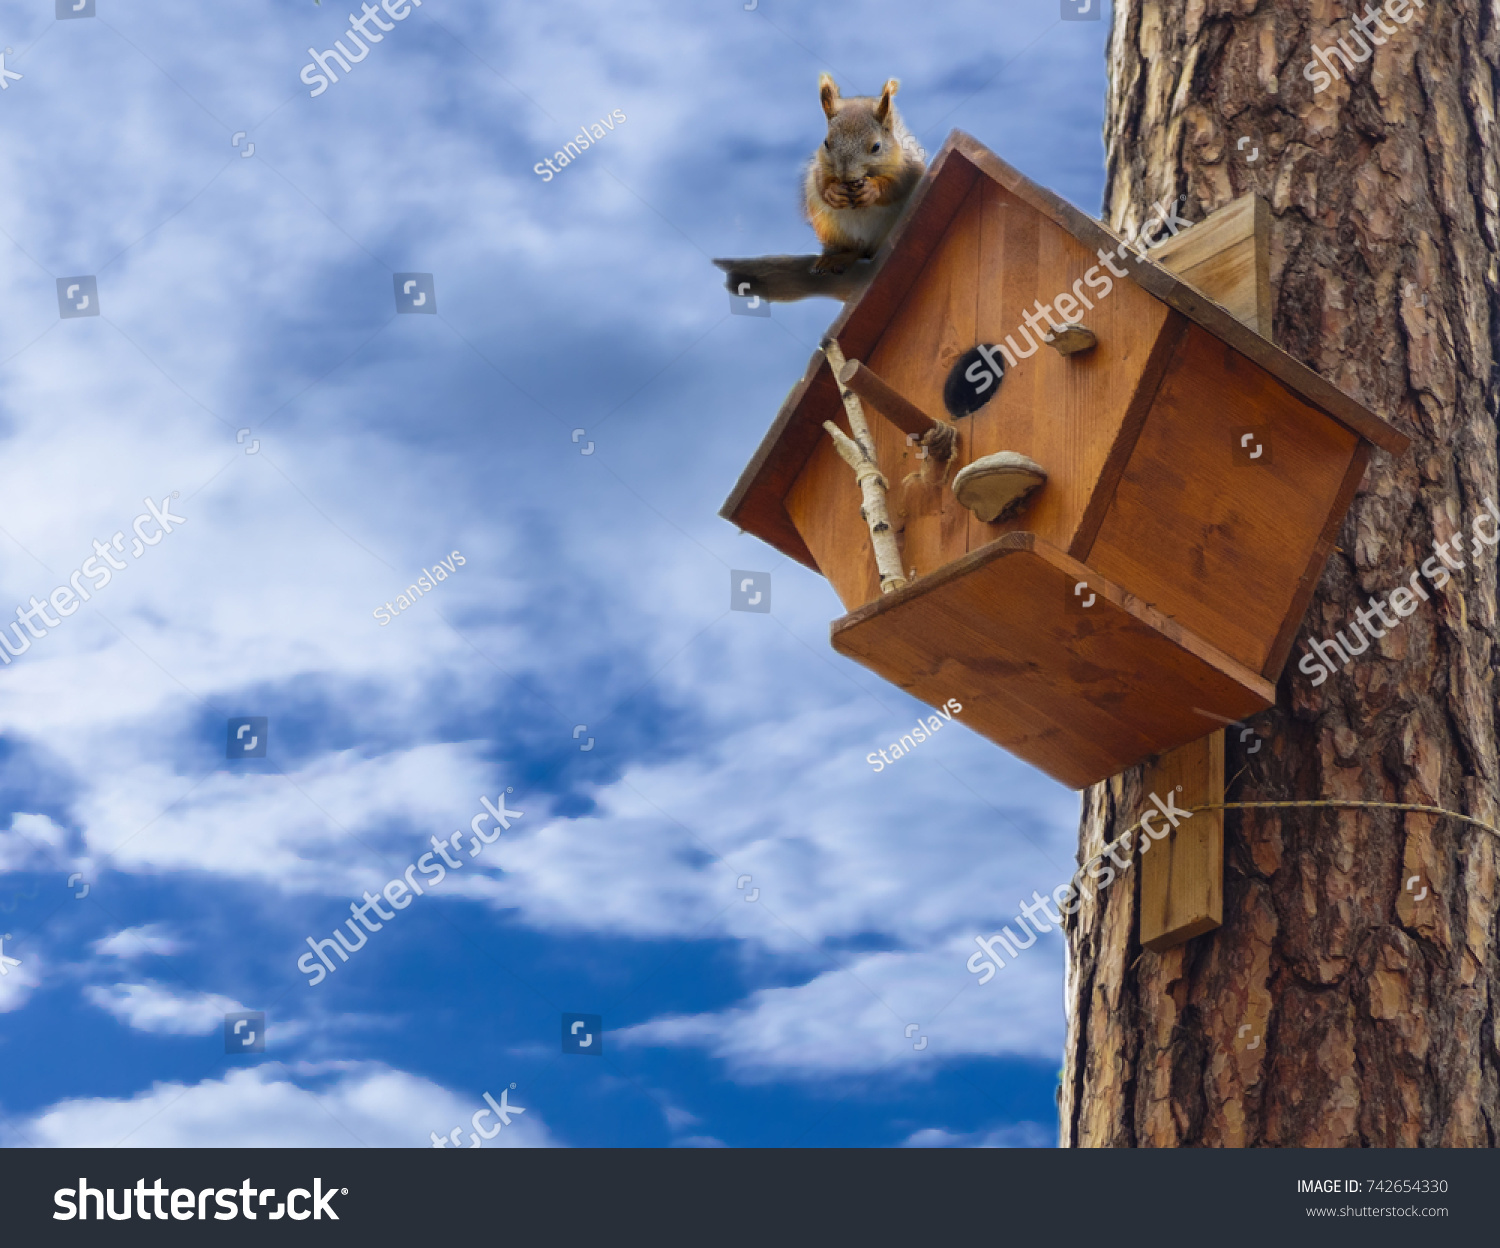 Squirrel on squirrel tree house on a background of blue with clouds. Squirrel in the Park eating a nut. #742654330